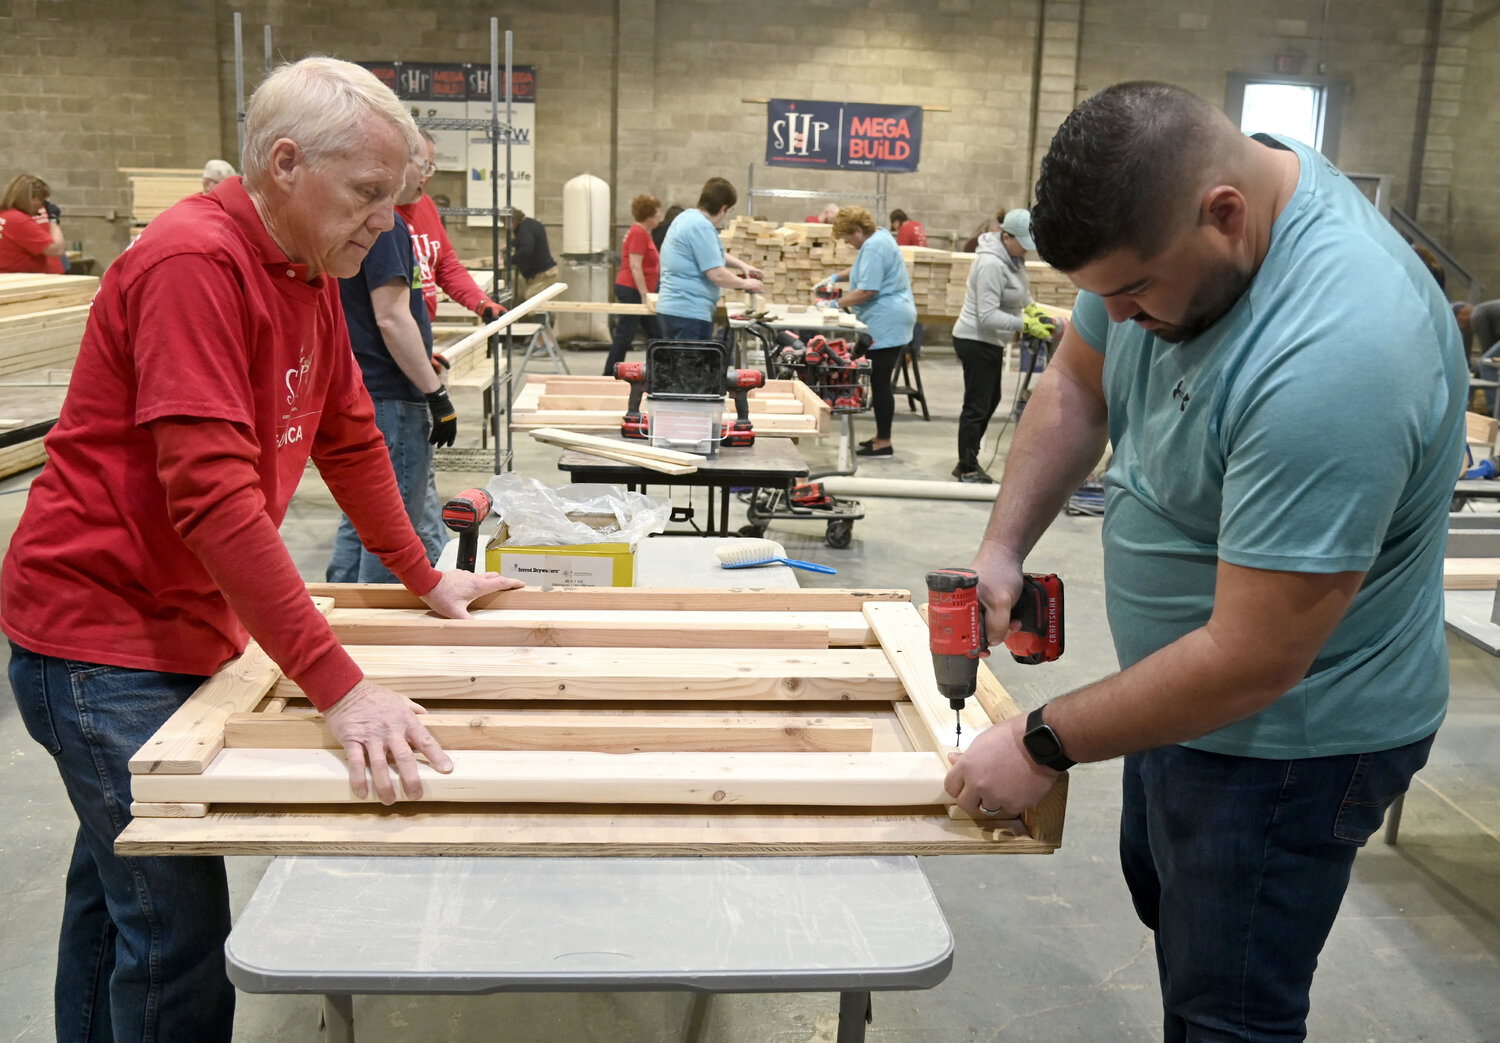 Dave Husted and Rich Hickel build headboards at the SHP Mega Build II event in Yorkville on Friday afternoon.